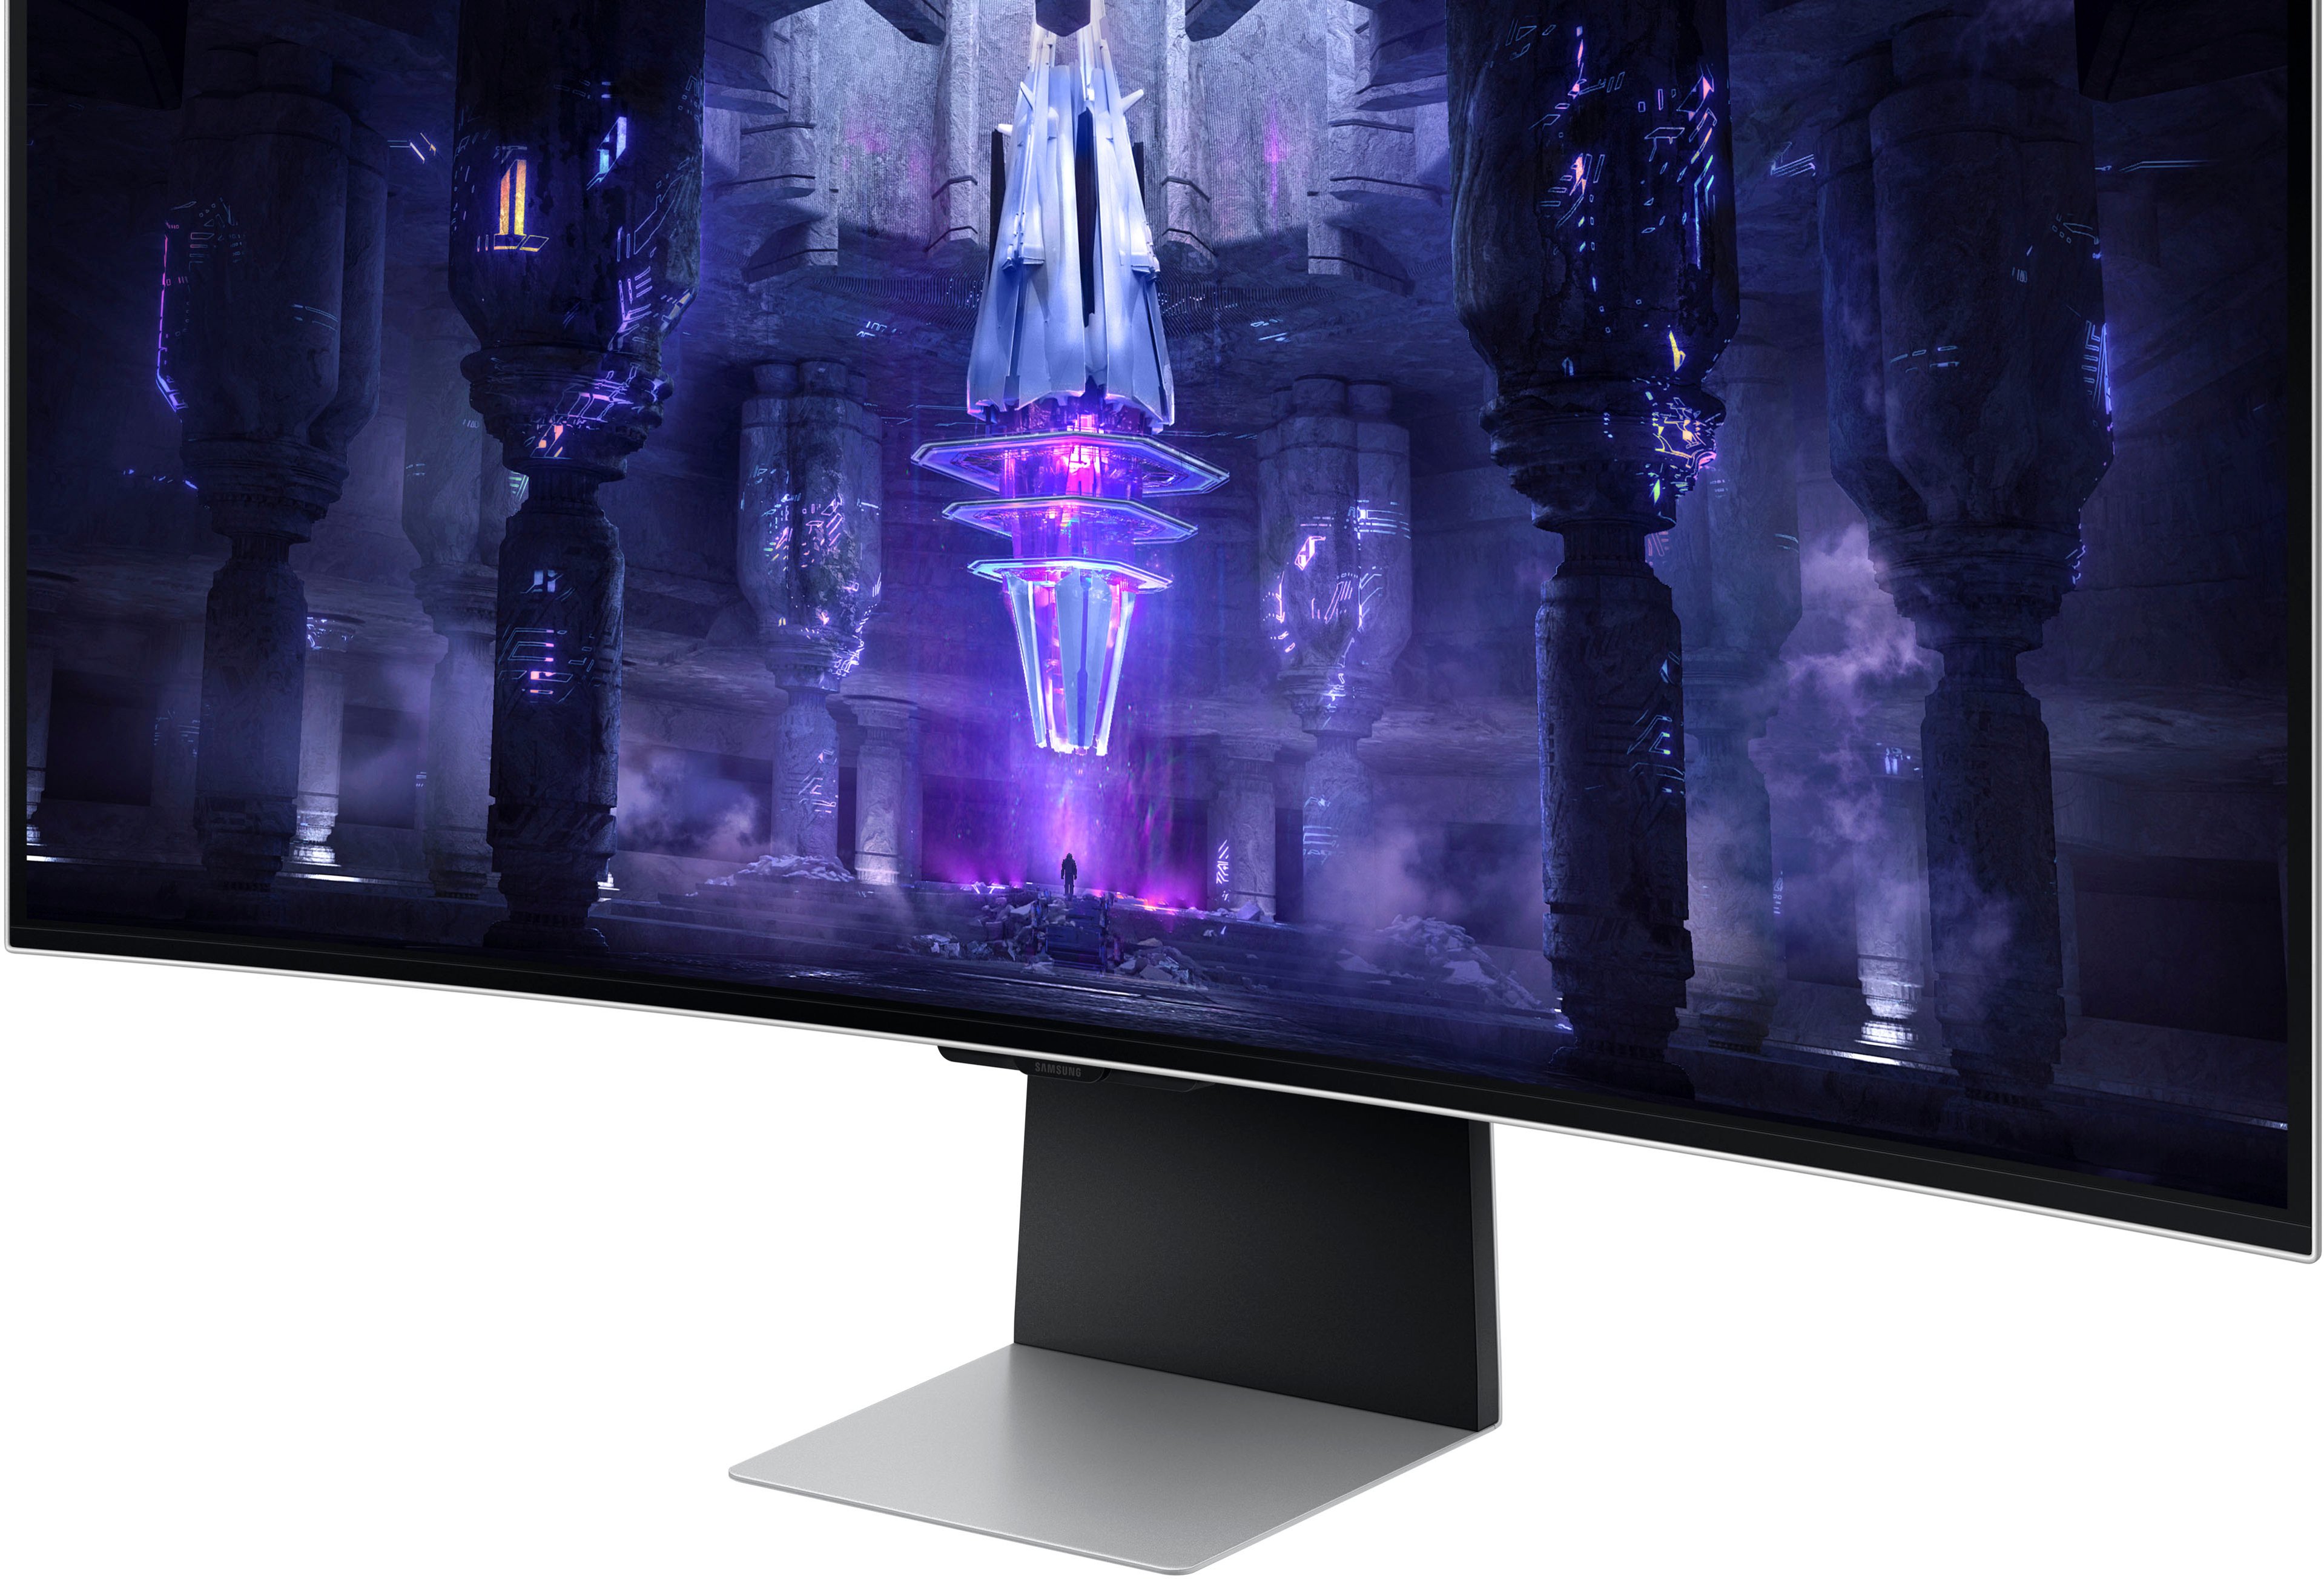 LG's new curved OLED gaming monitor may outclass Samsung's Odyssey line